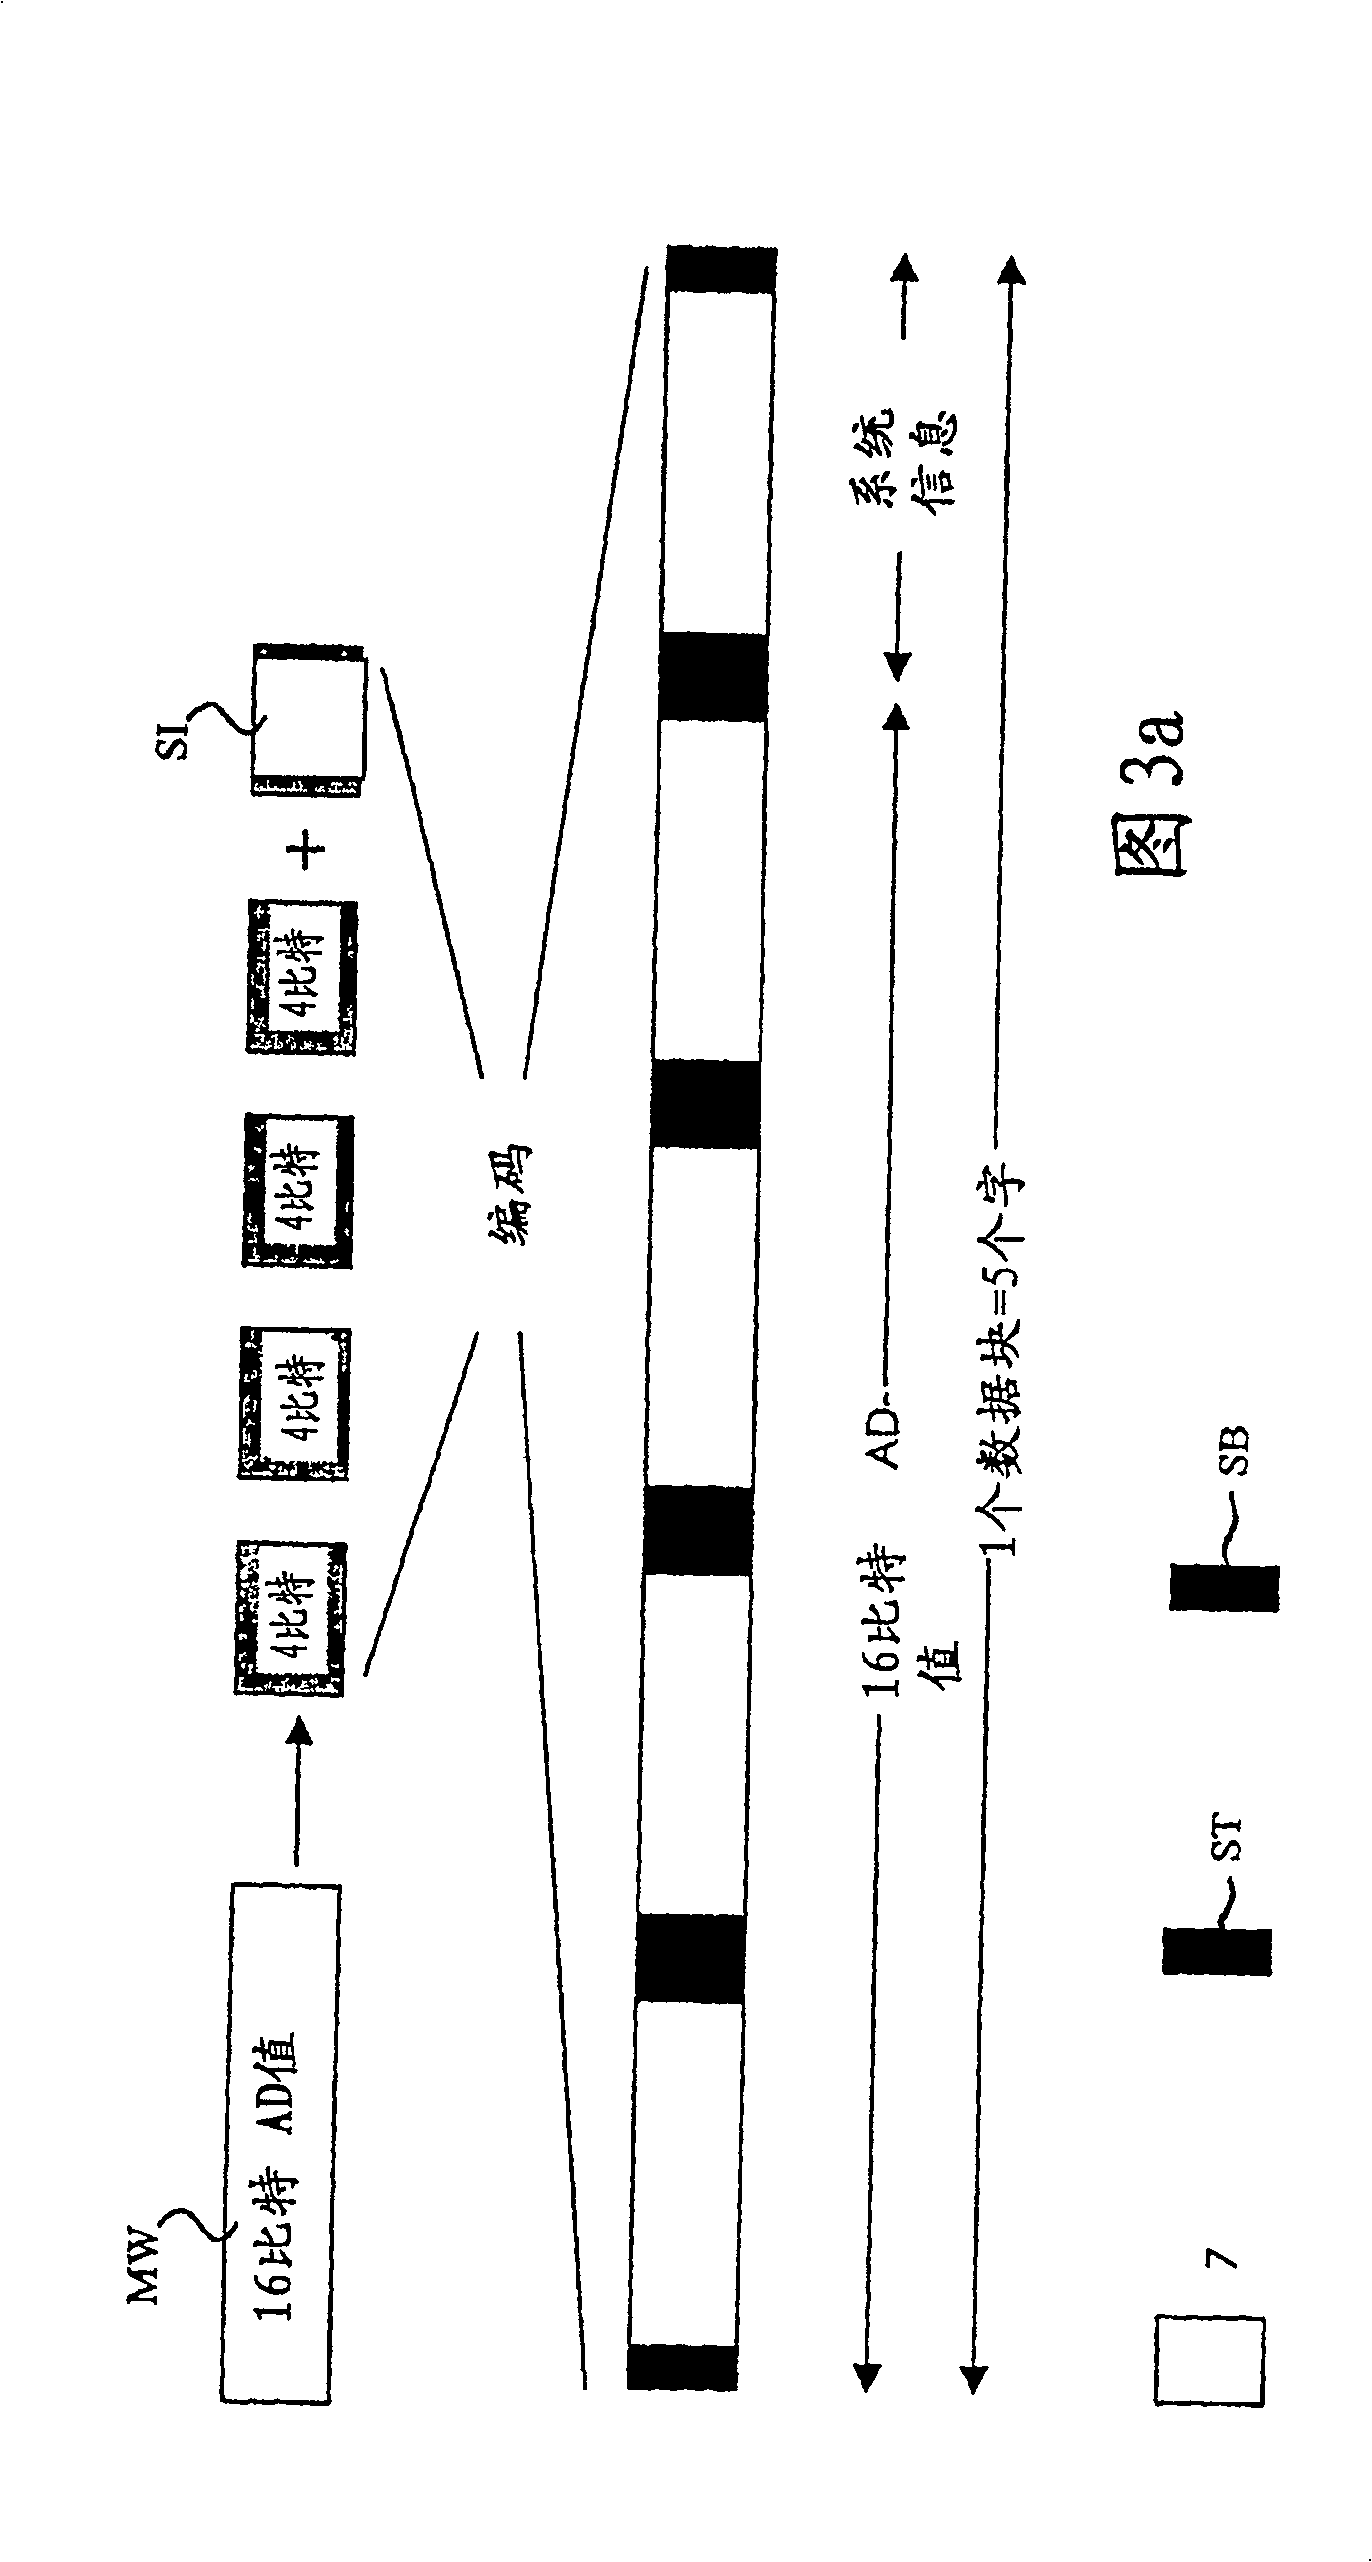 Measuring system comprising an intelligent sensor head and having a reduced power consumption for medium-voltage or high-voltage systems or in mining, and method therefor